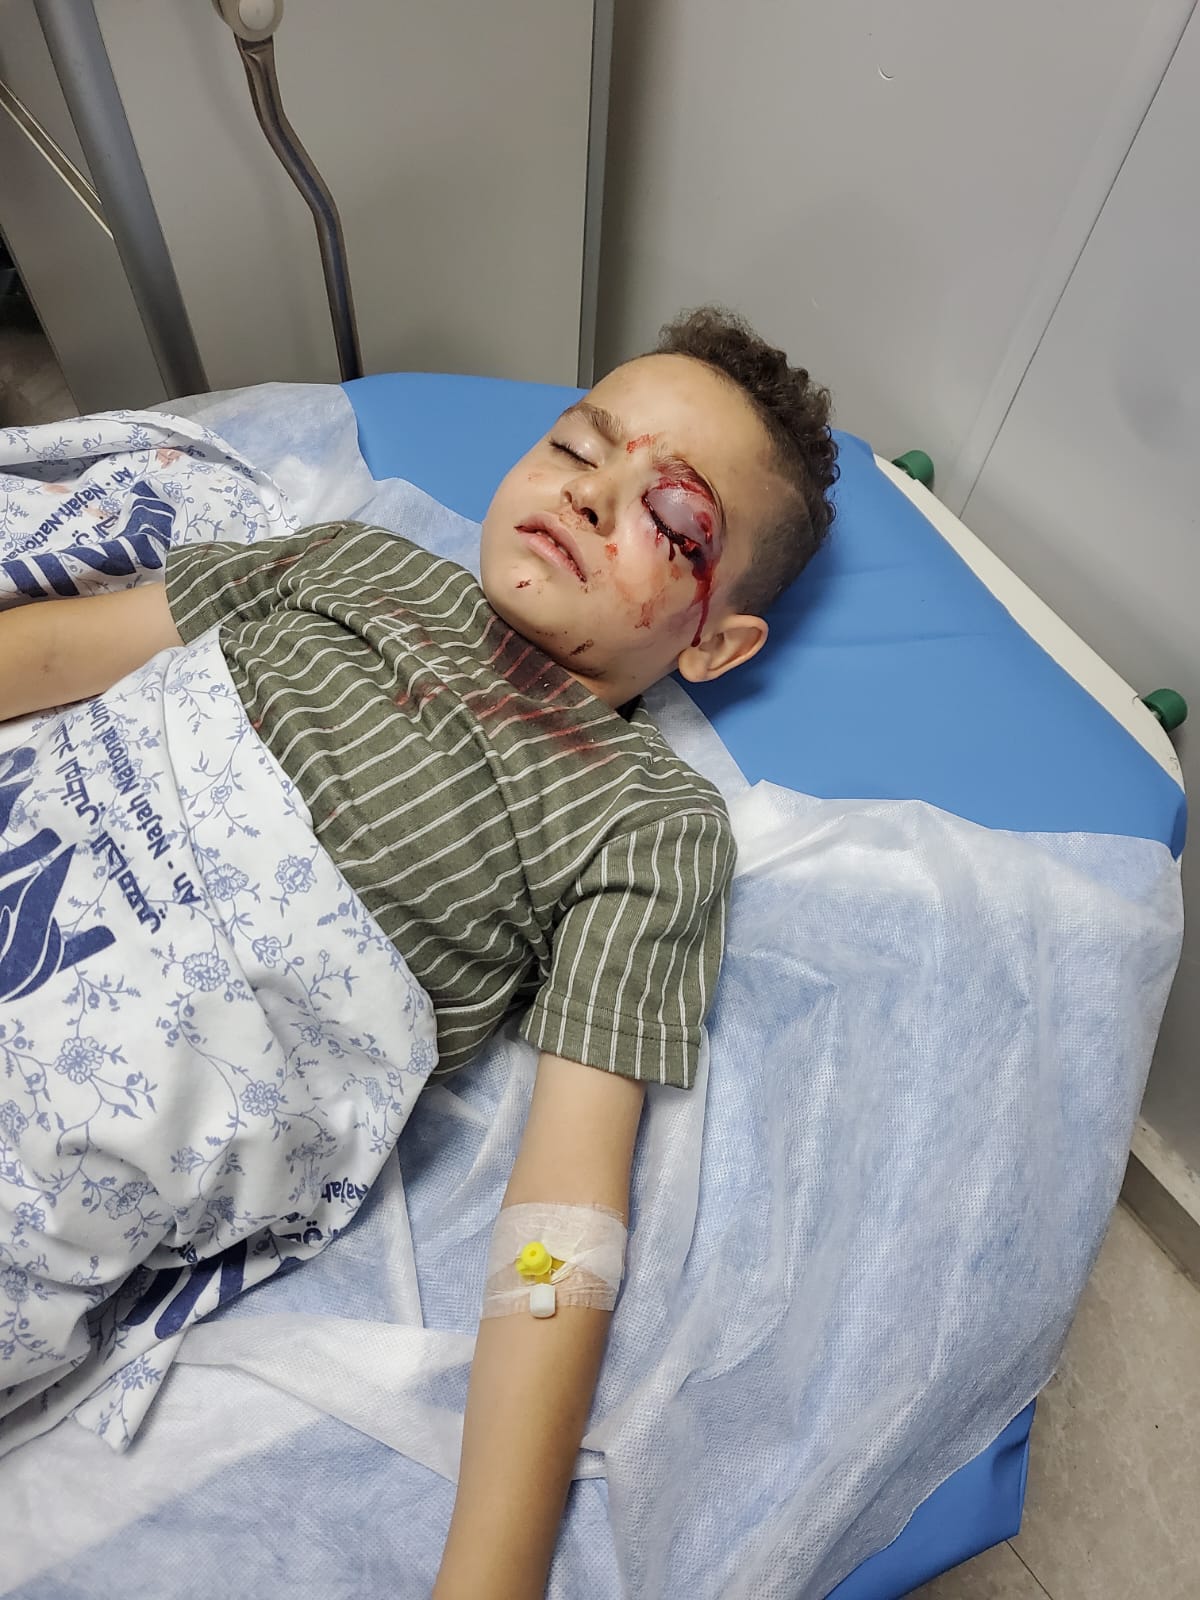 Five-year-old Khaled Akram Khaled Malalha lost his left eye after Israeli forces shot him in the head with live ammunition. (Photo: Courtesy of the Malalha family)